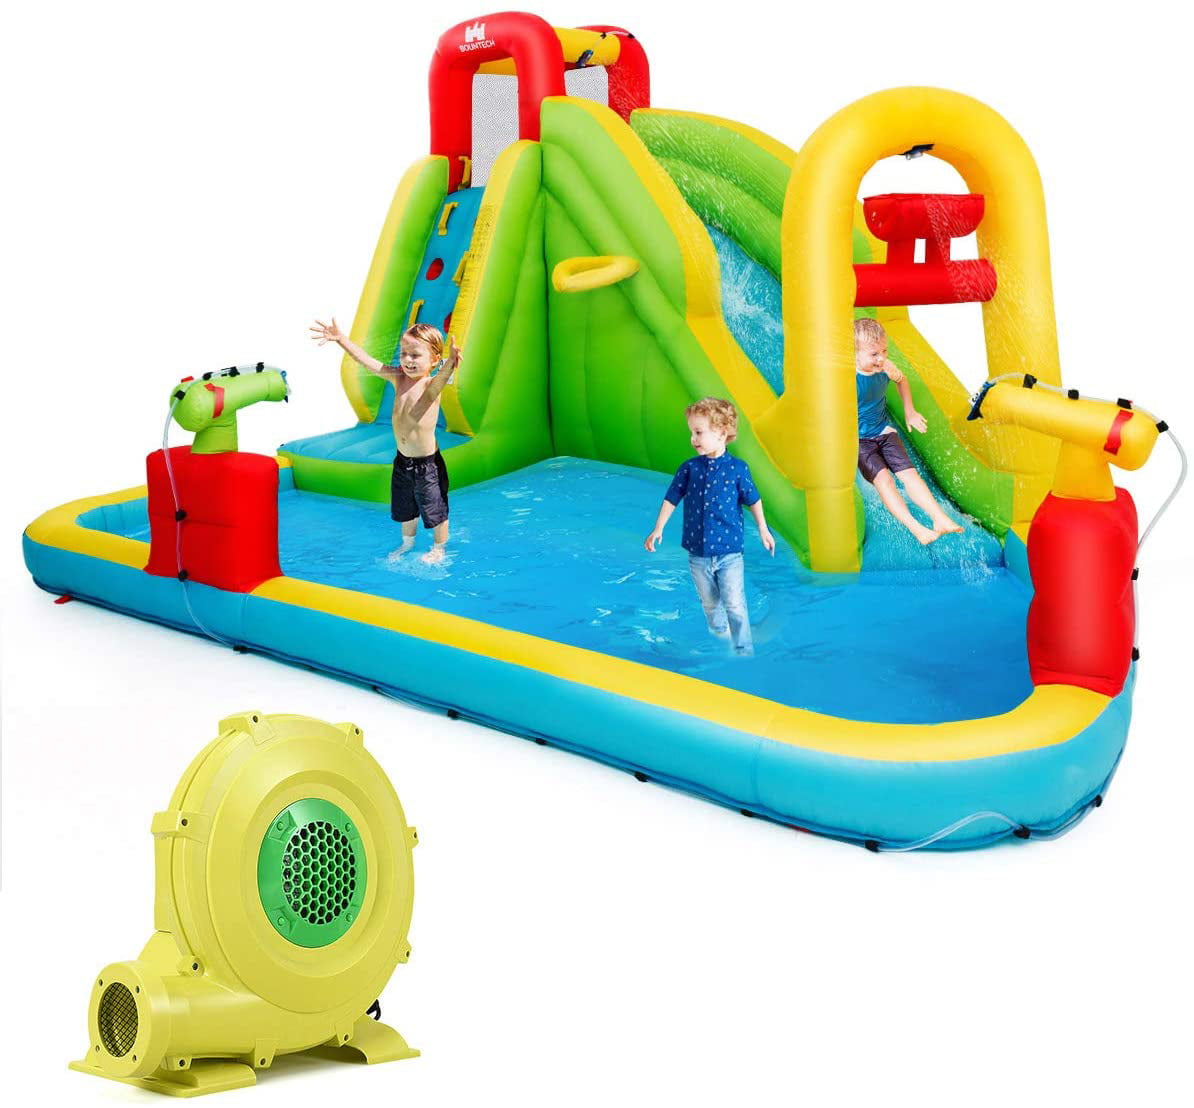 Basketball Hoop Stakes 6 in 1 Bounce House w/ Climbing Wall Without Blower Repair Kit Jumping Area Hose Including Carry Bag Water Cannon Splash Pool BOUNTECH Inflatable Water Slide